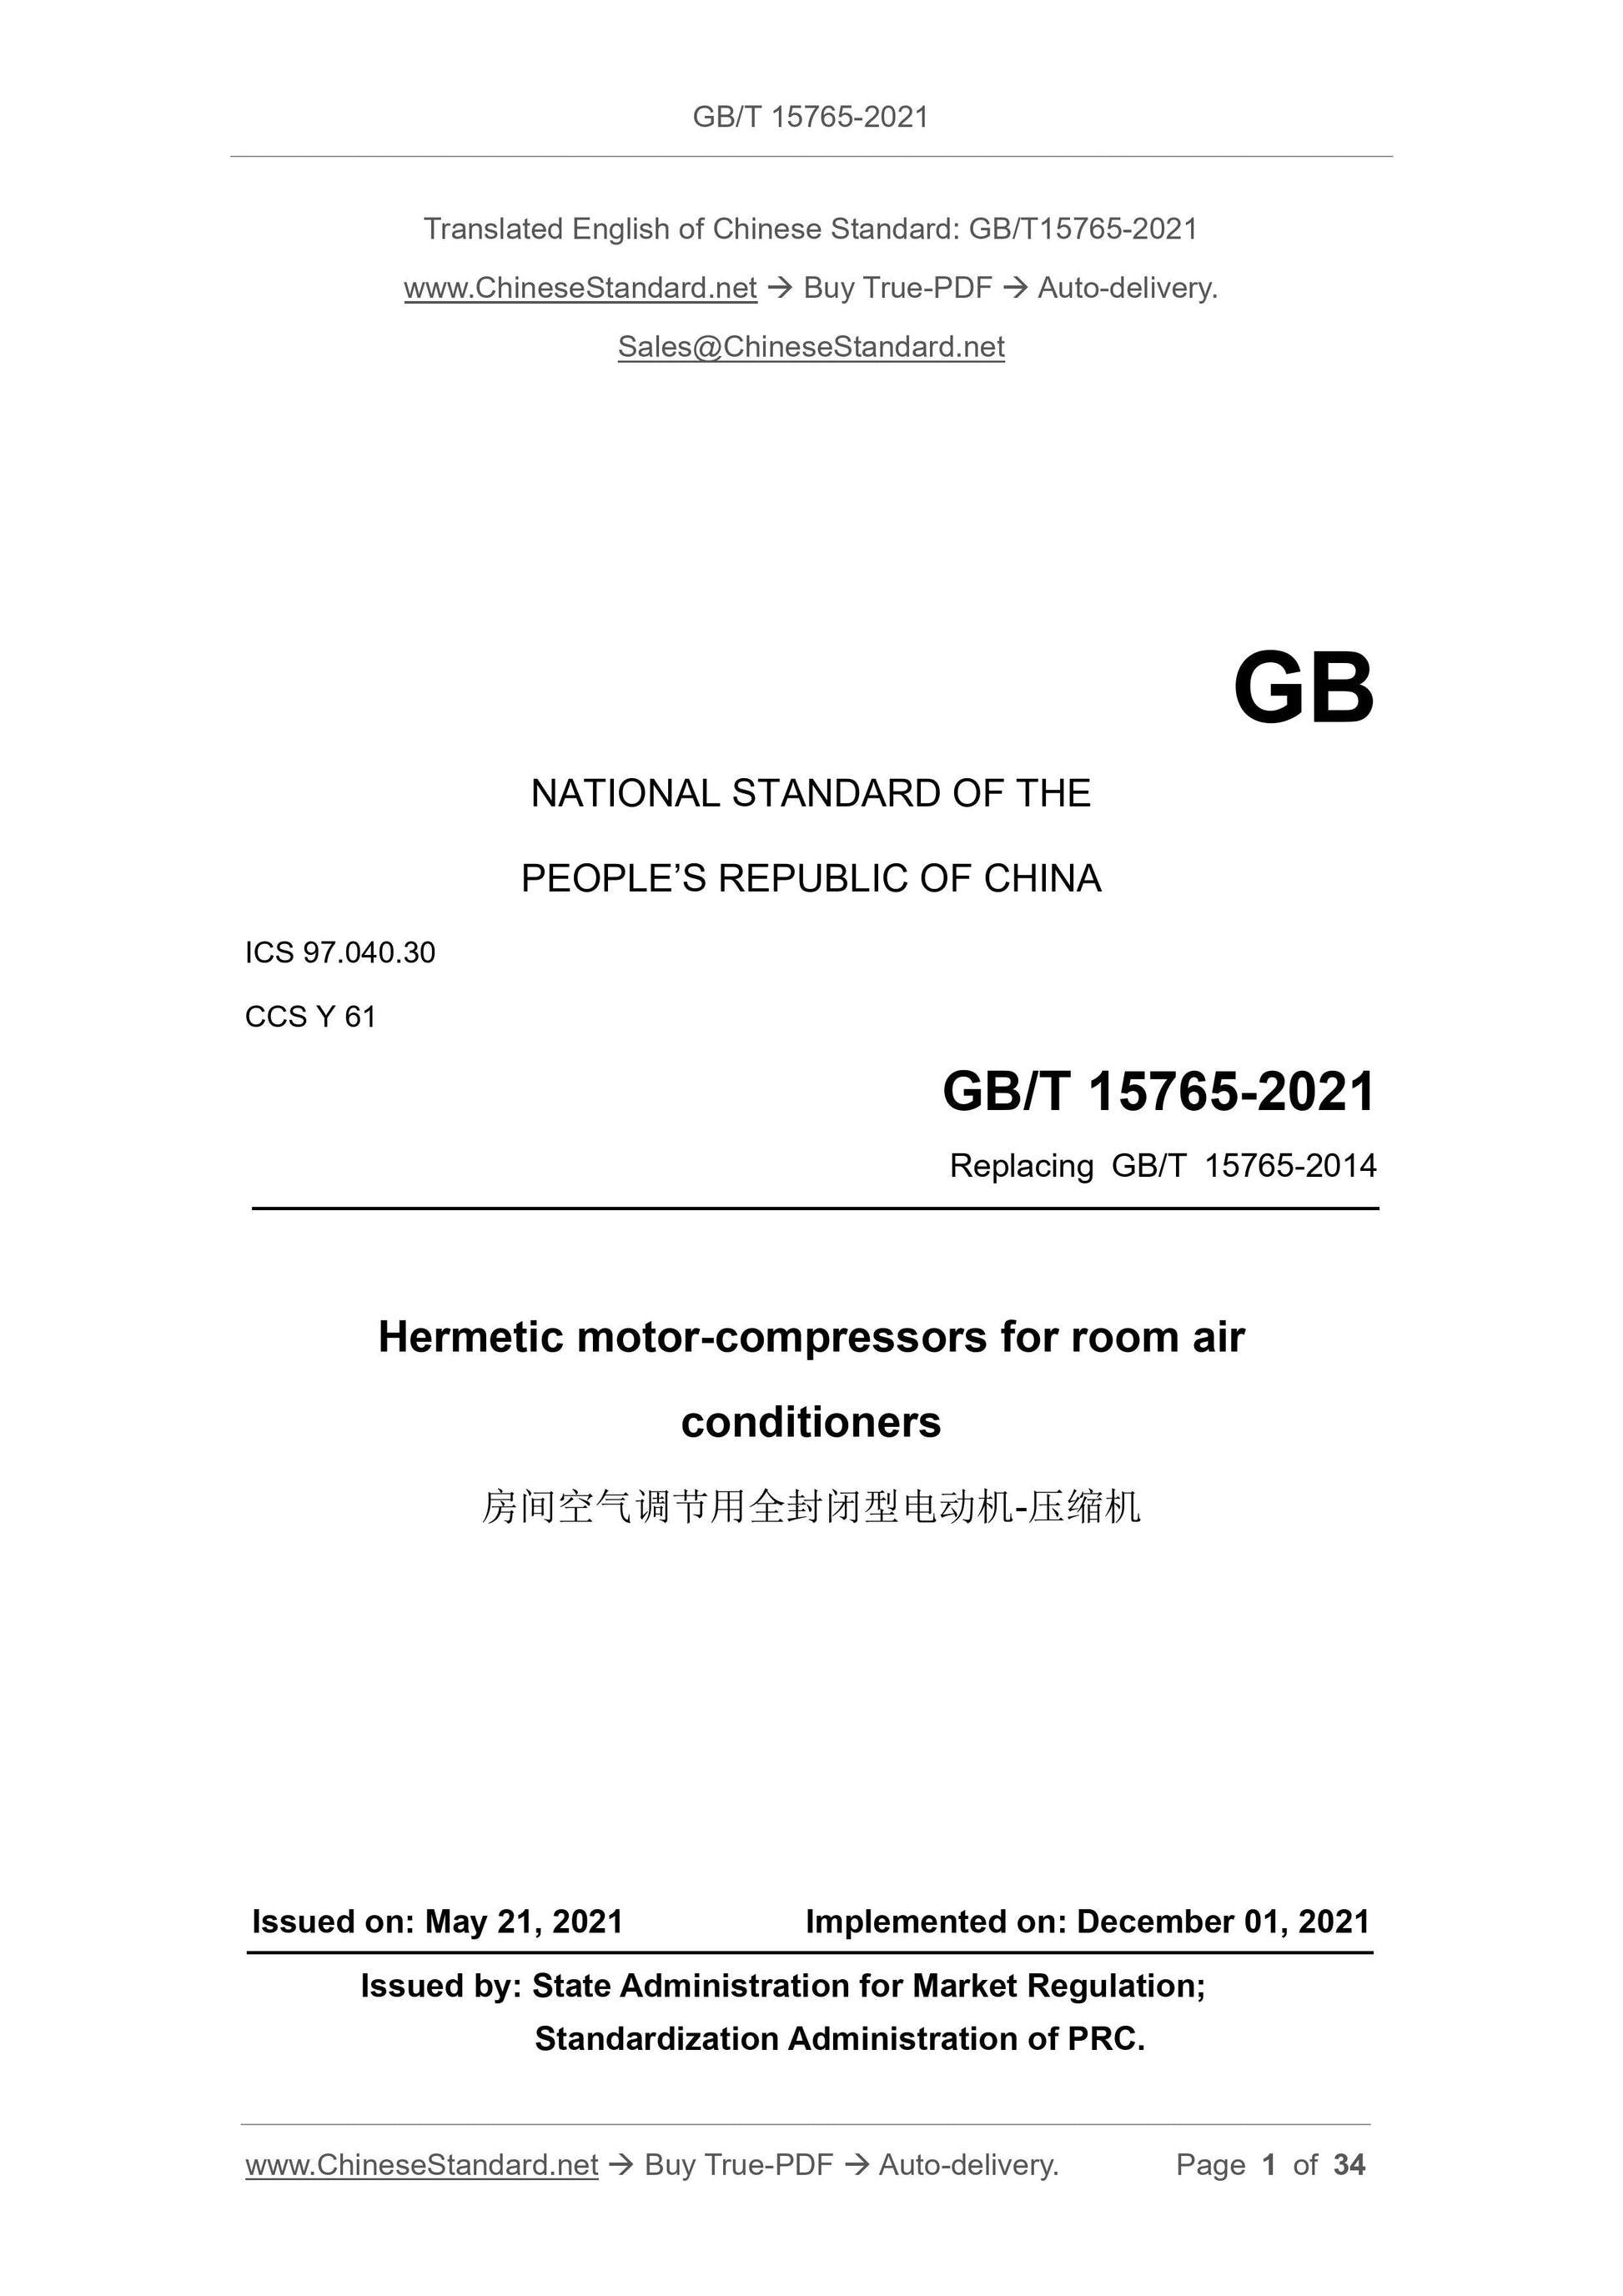 GB/T 15765-2021 Page 1